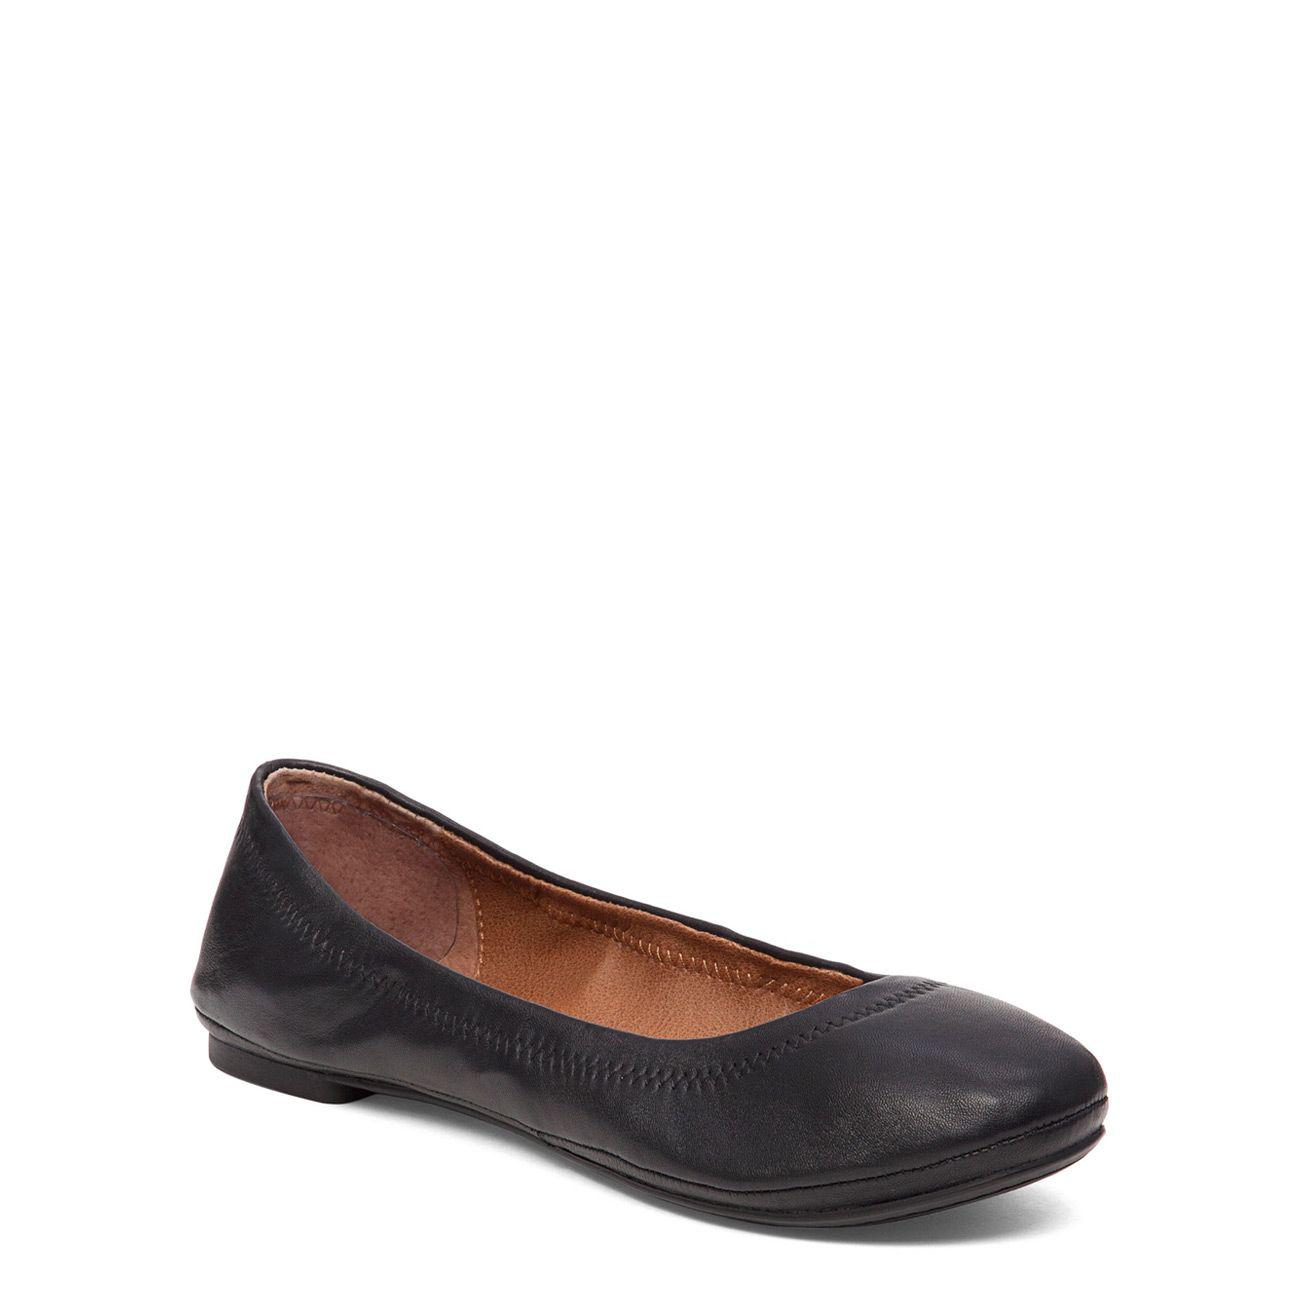 Lucky Brand Emmie Foldable Ballet Flat in Black - Lyst